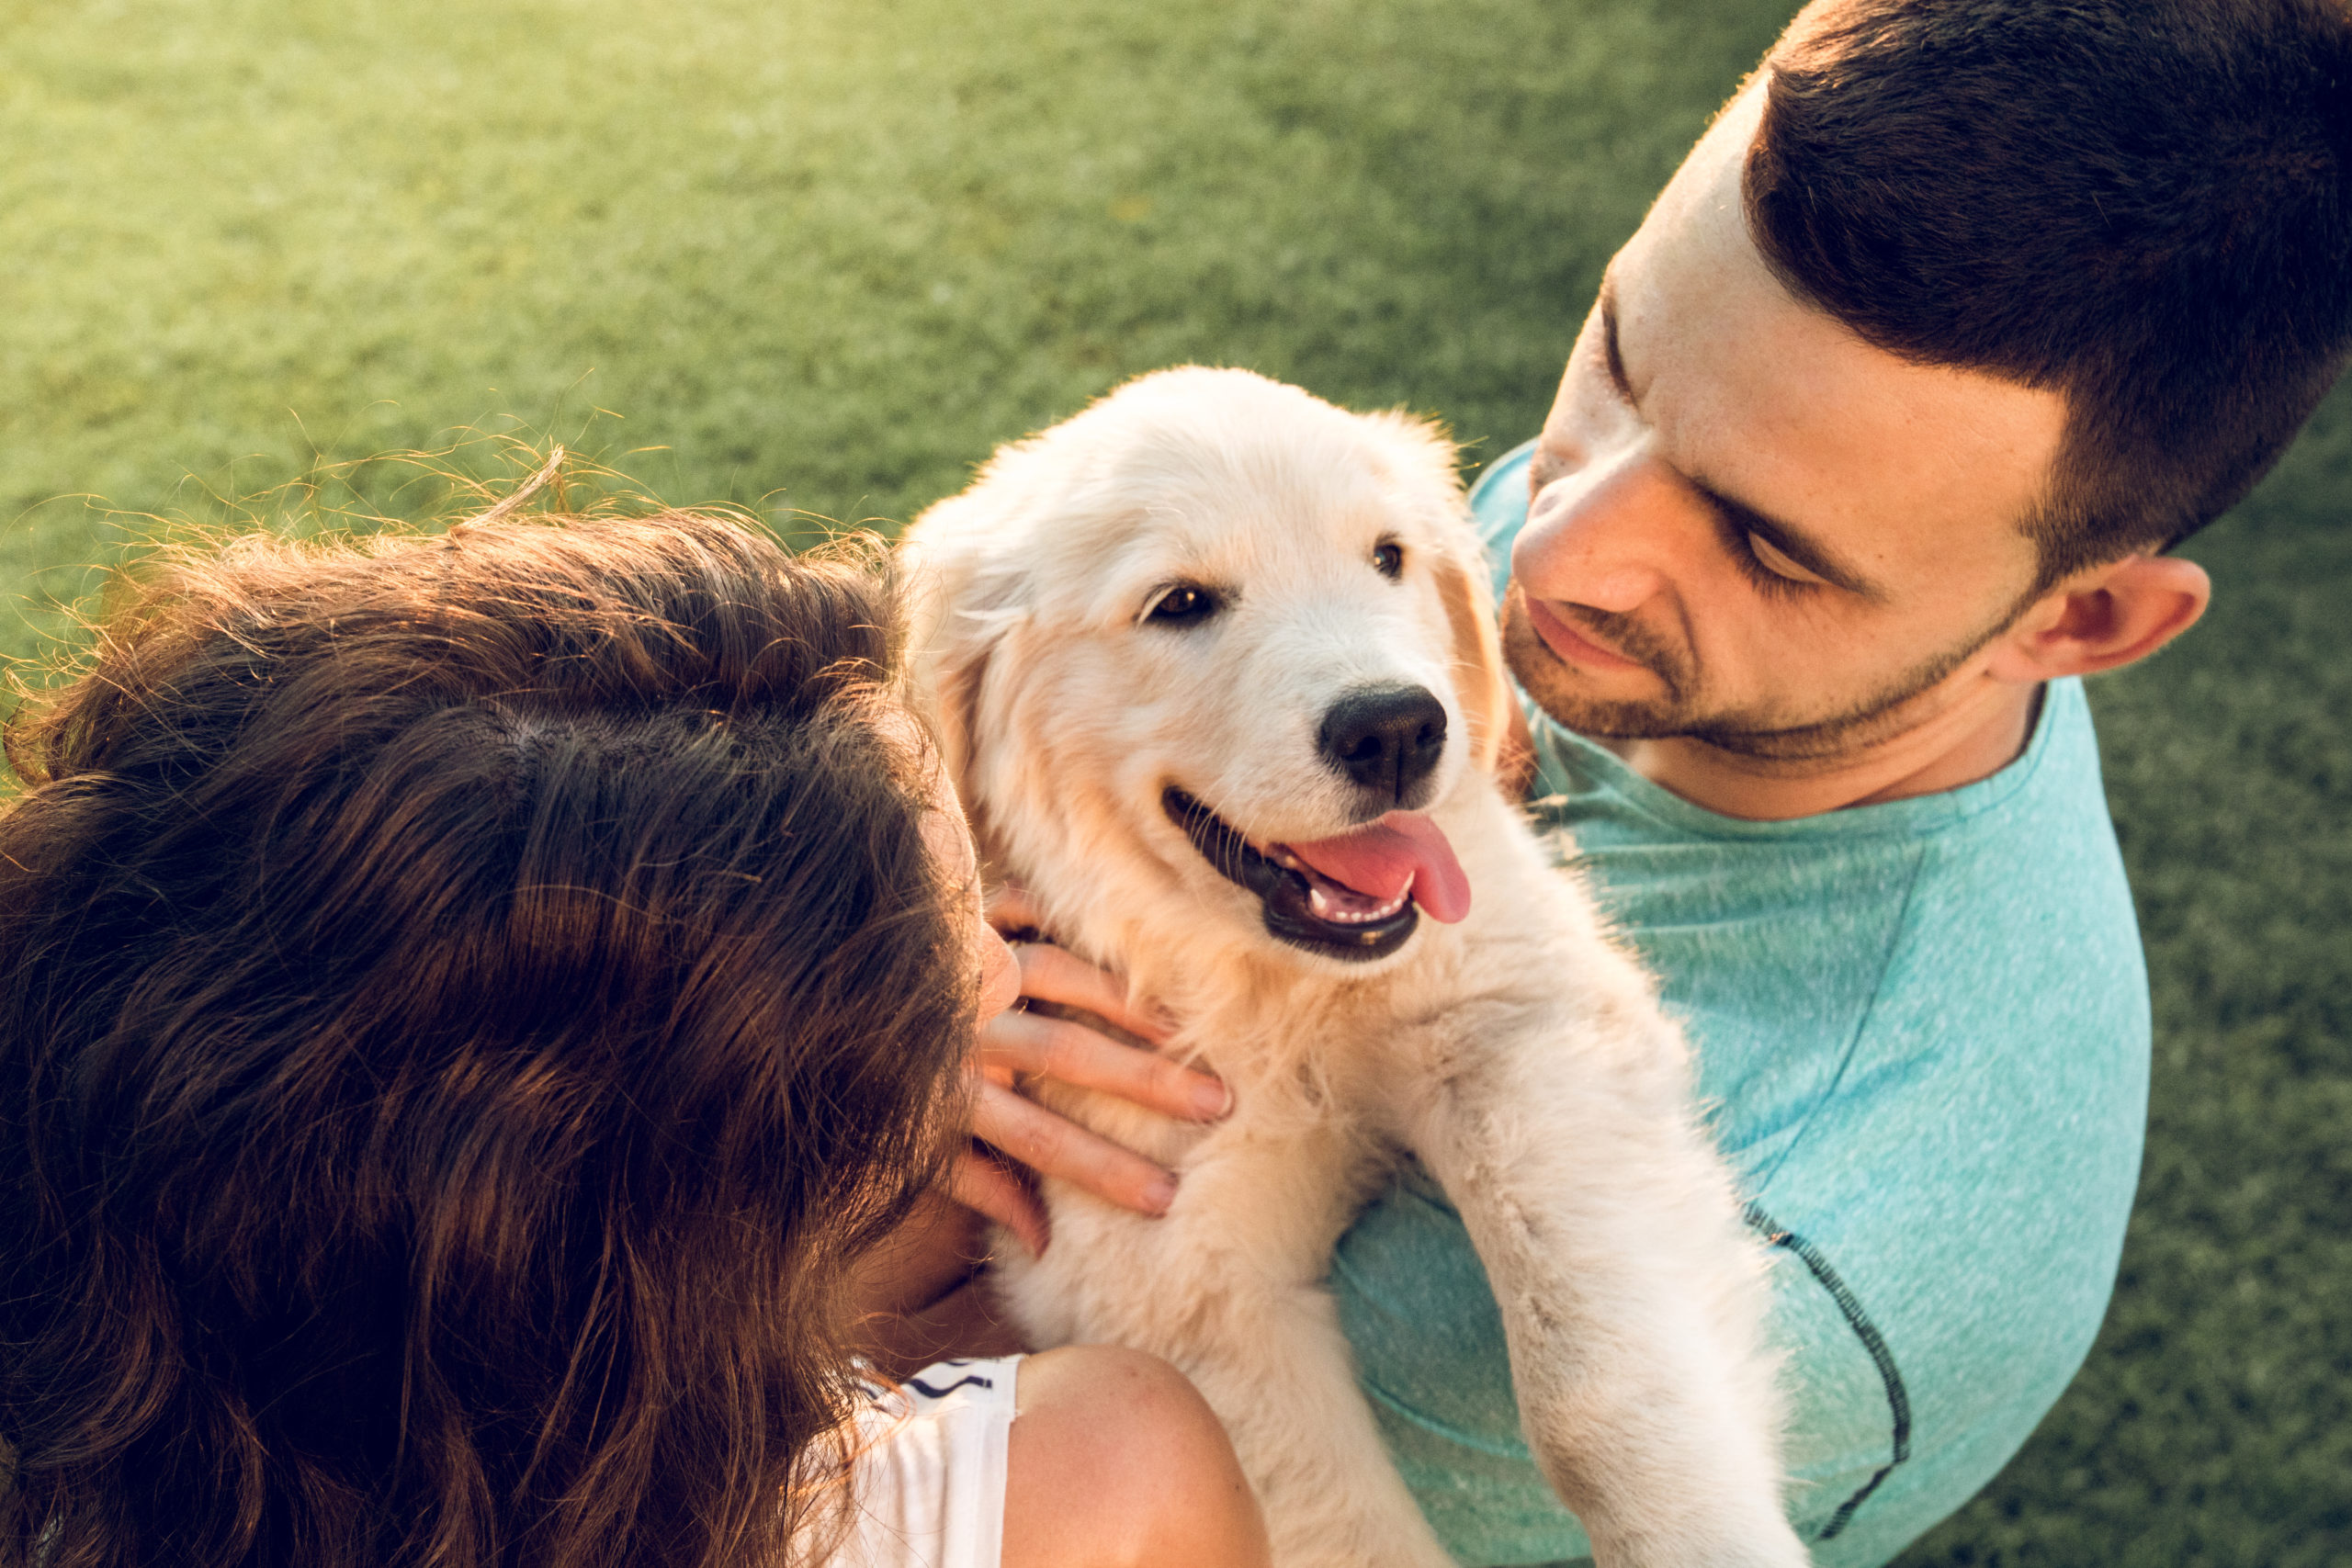 Pets & Relationships: Who Gets The Dog?